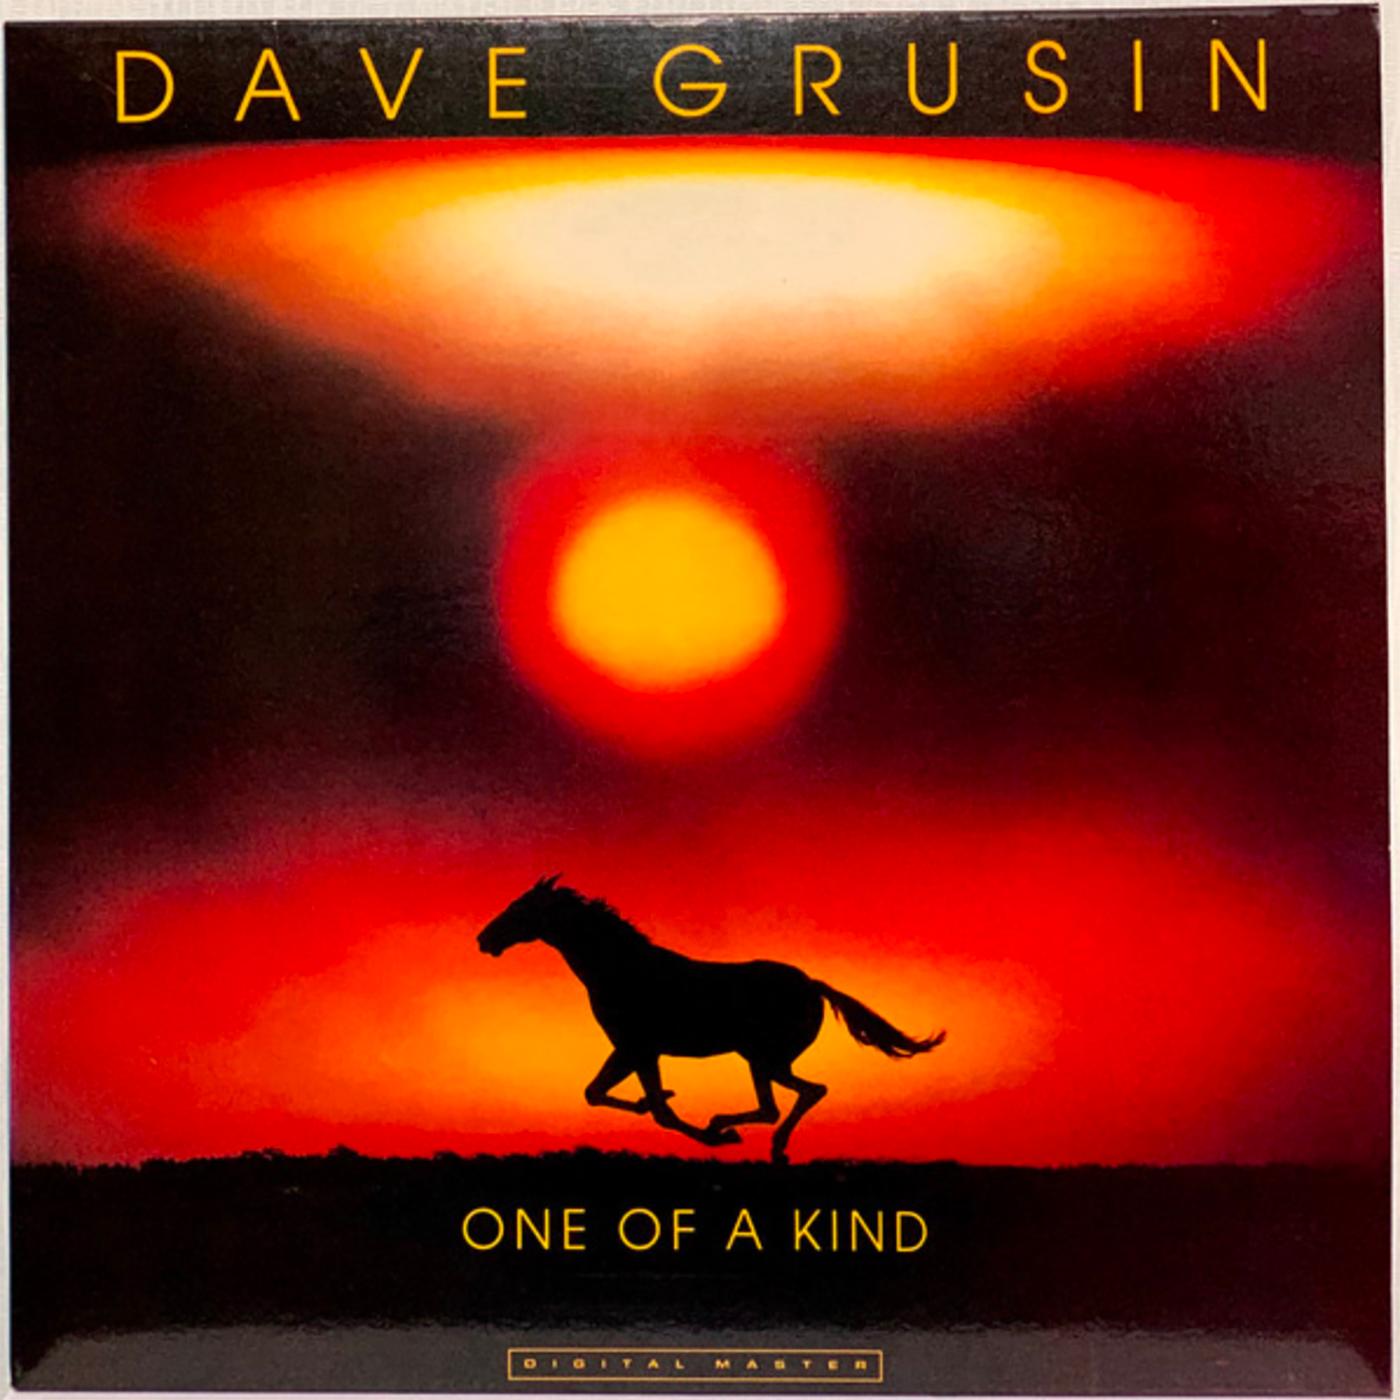 Running Horse at Sunset - Dave Grusin Album Cover - Photograph by Mitchell Funk